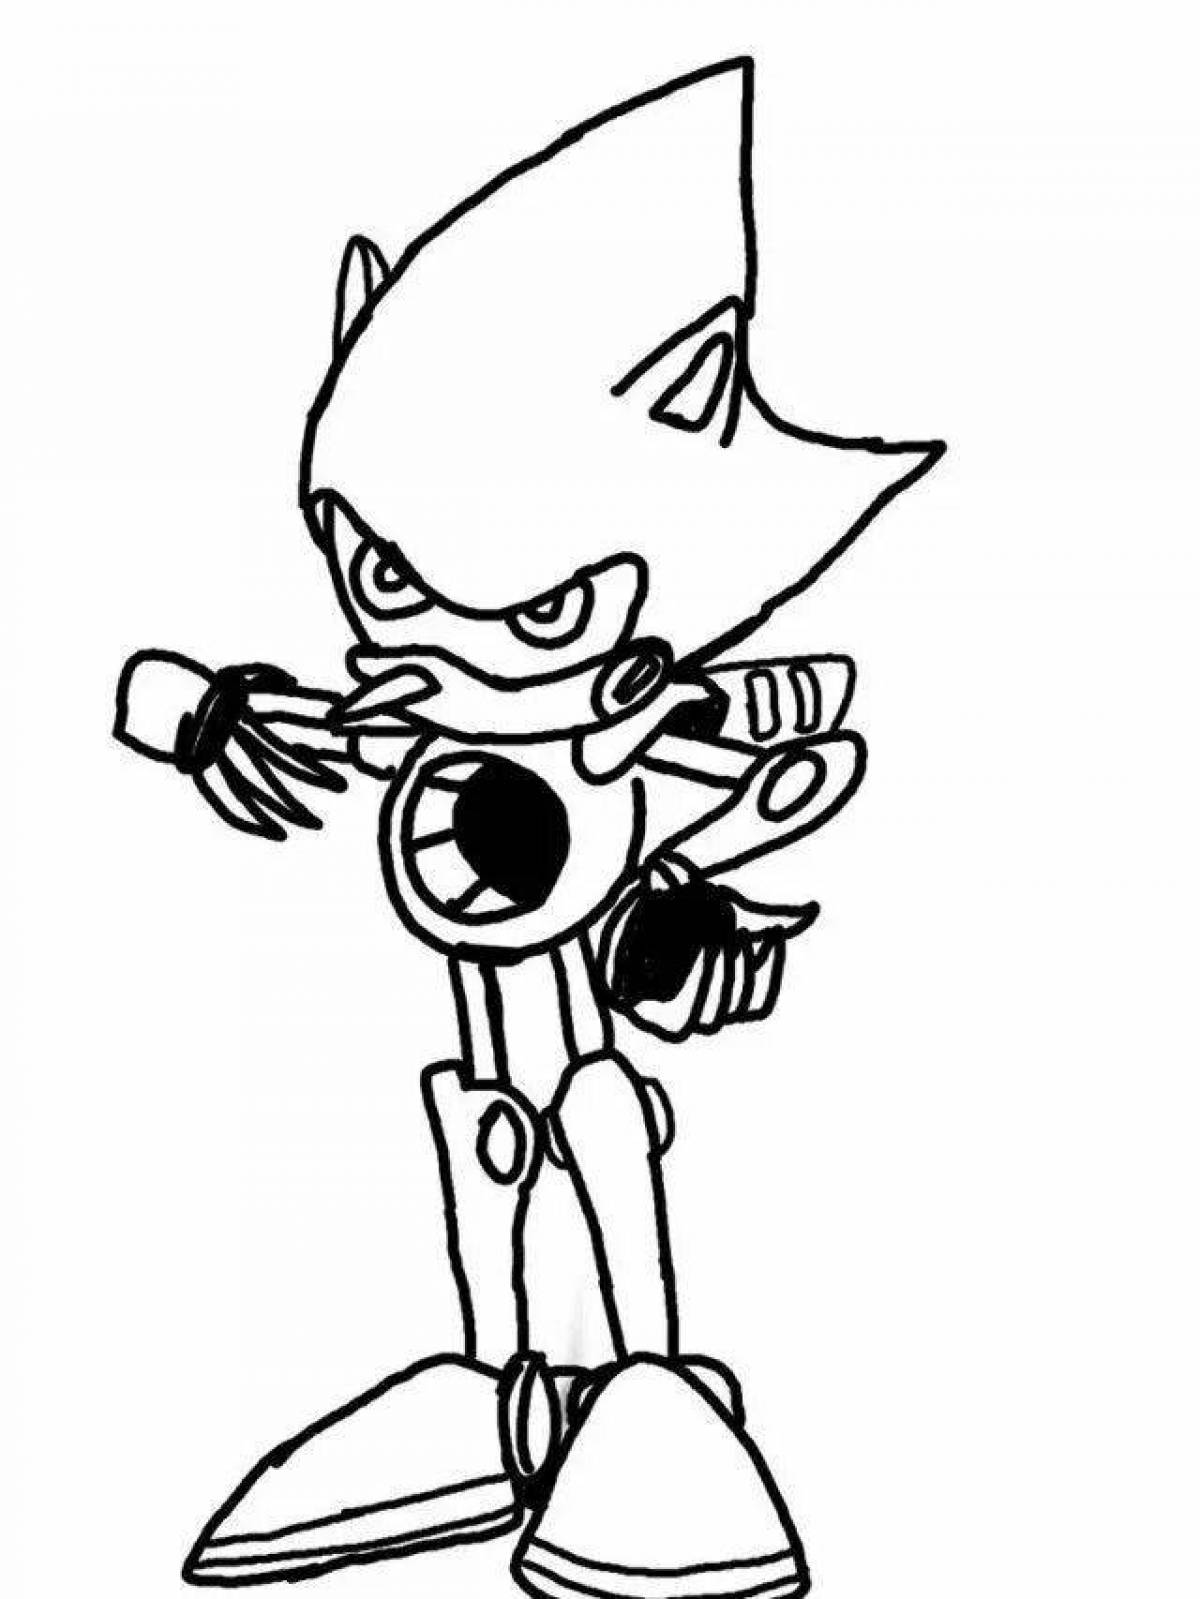 Majestic metal sonic coloring page